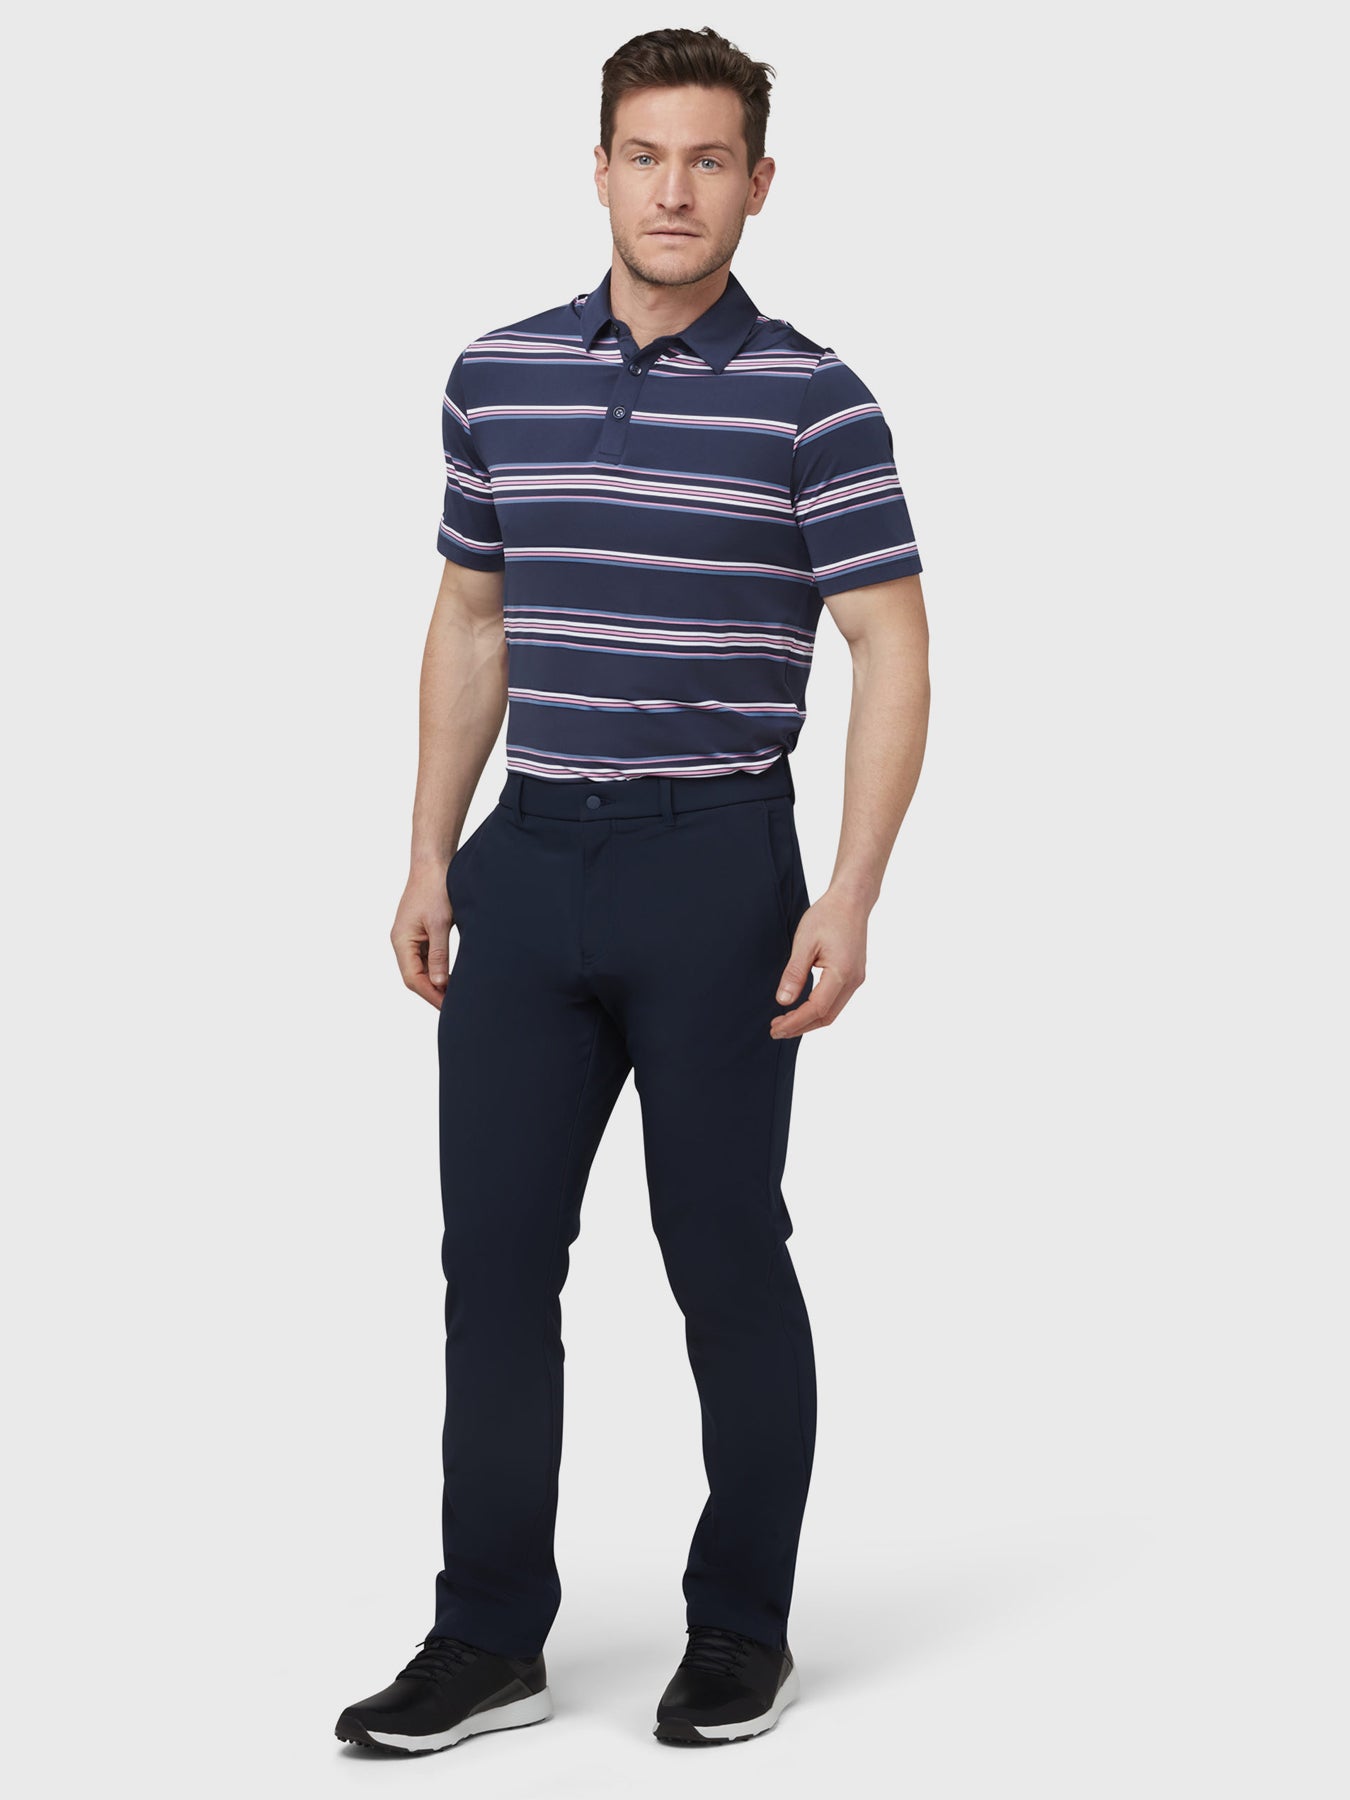 View Resort Ventilated Stripe Golf Polo In Peacoat Peacoat L information